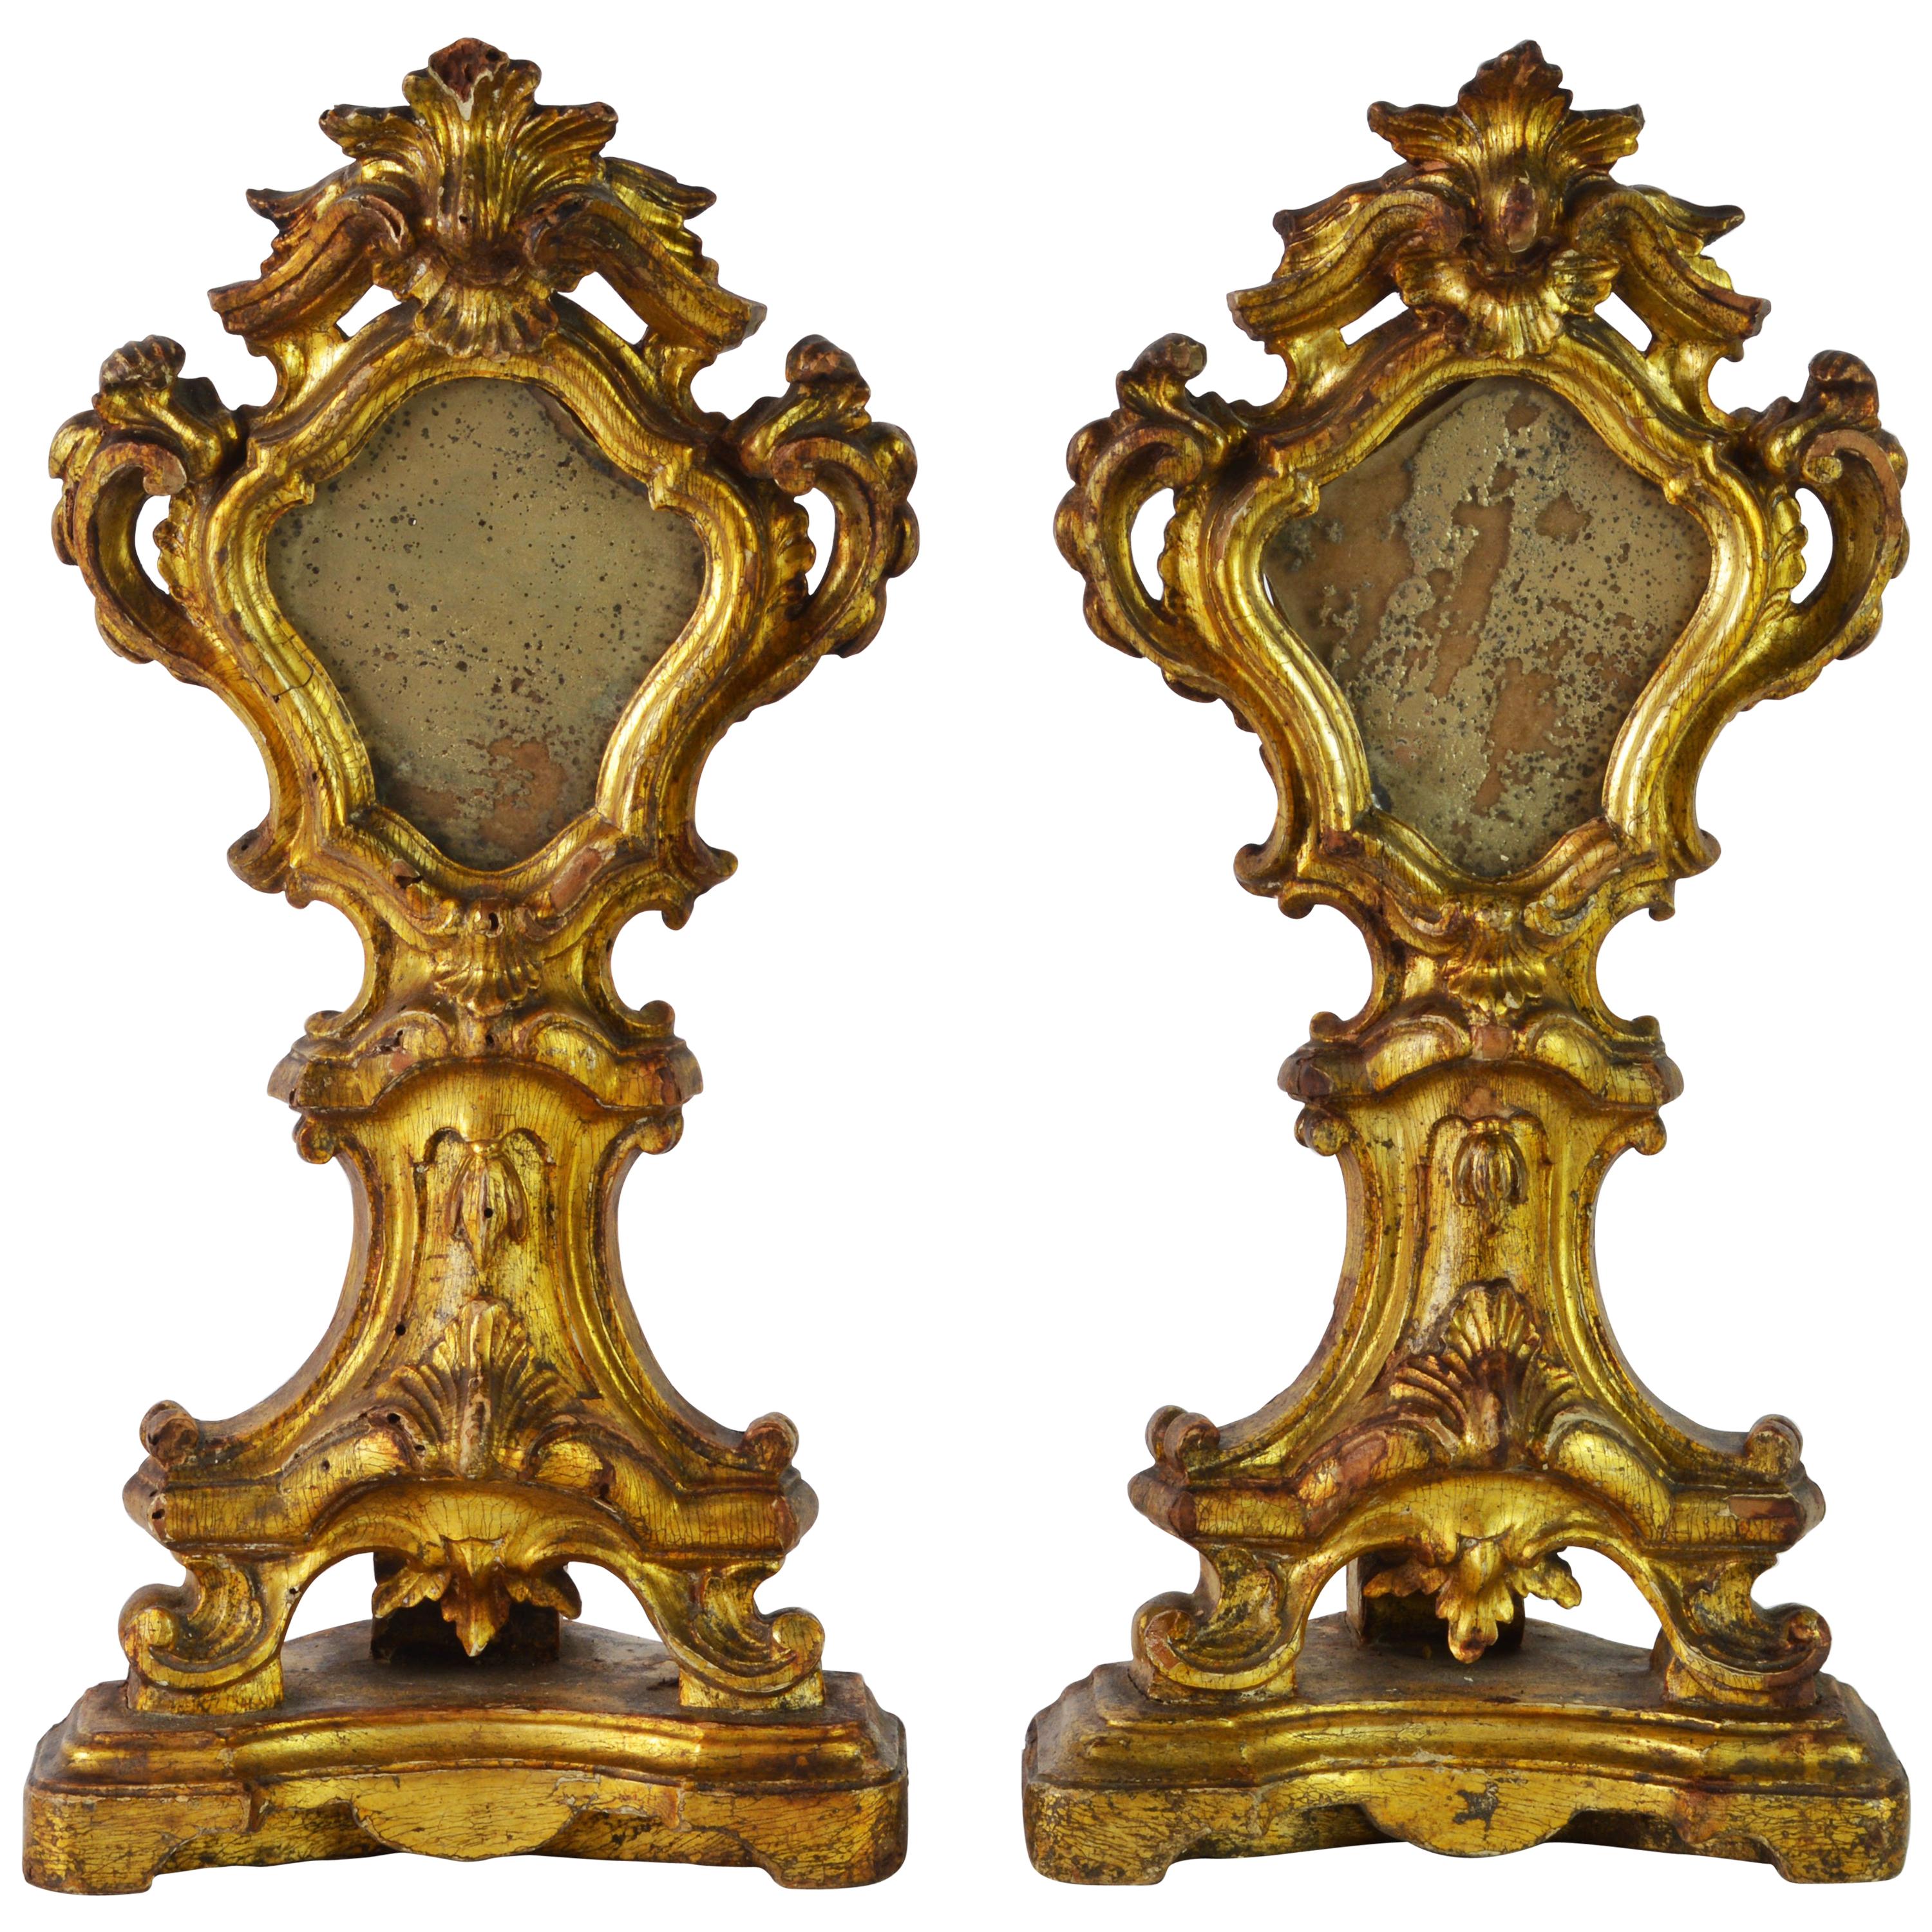 Pair of Mid-19th Century Italian Baroque Style Carved Giltwood Reliquaries